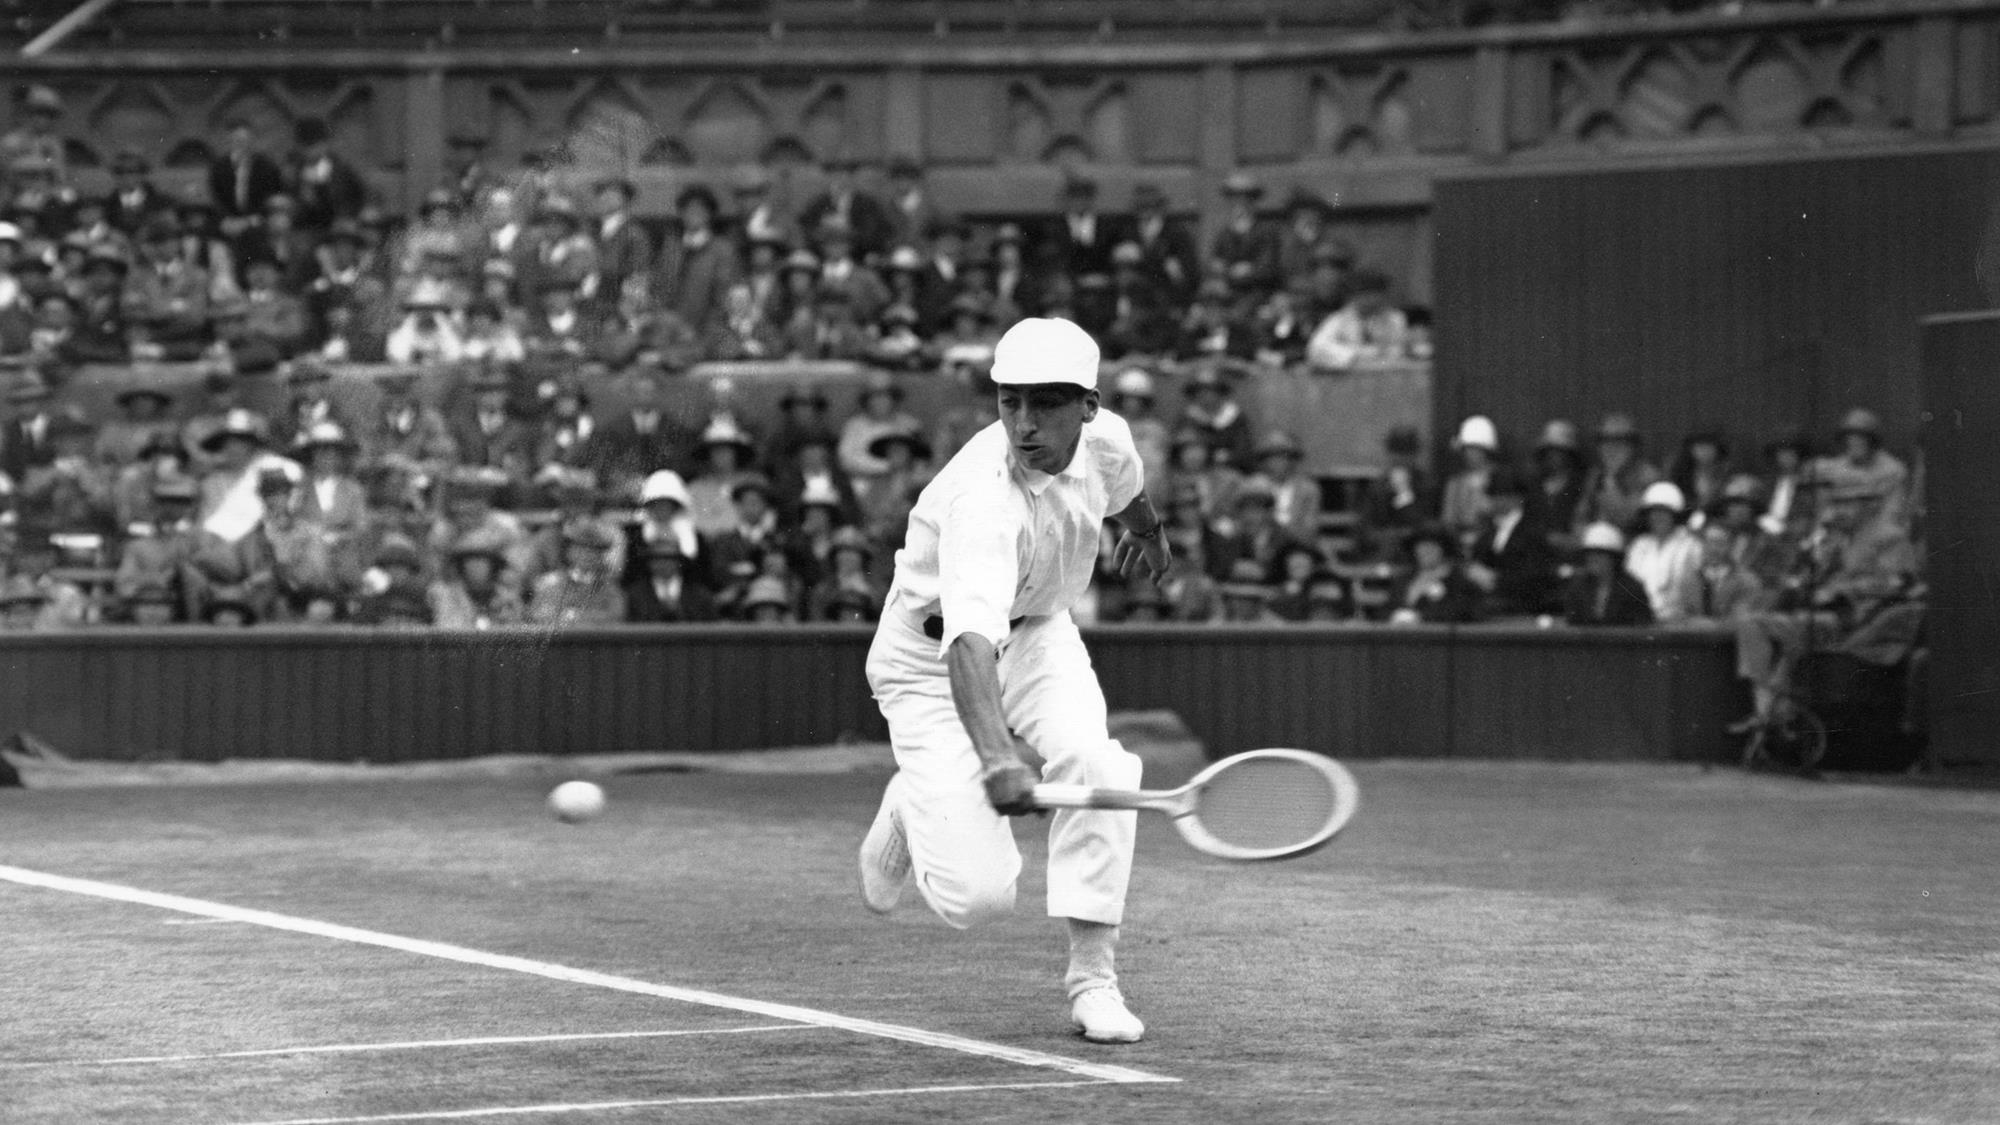 is Dangle tvetydigheden René Lacoste, tennis champion and fashion icon - News Rebeat